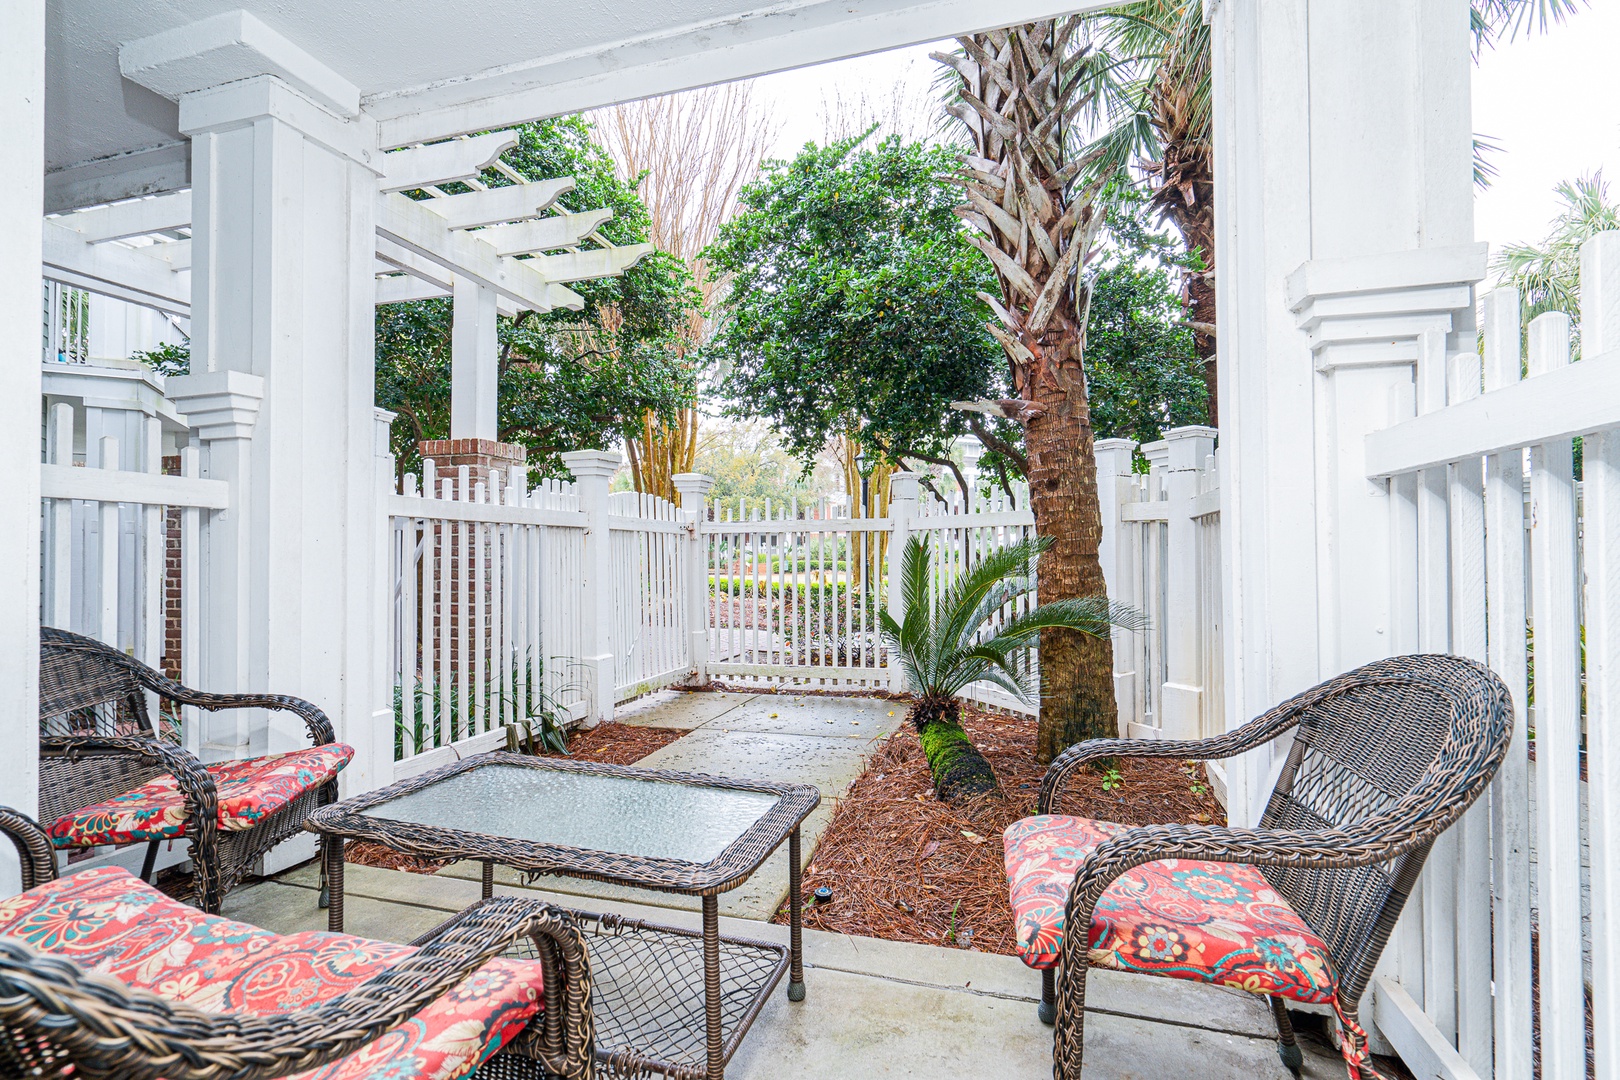 Step outside into the fresh air & relax on the patio